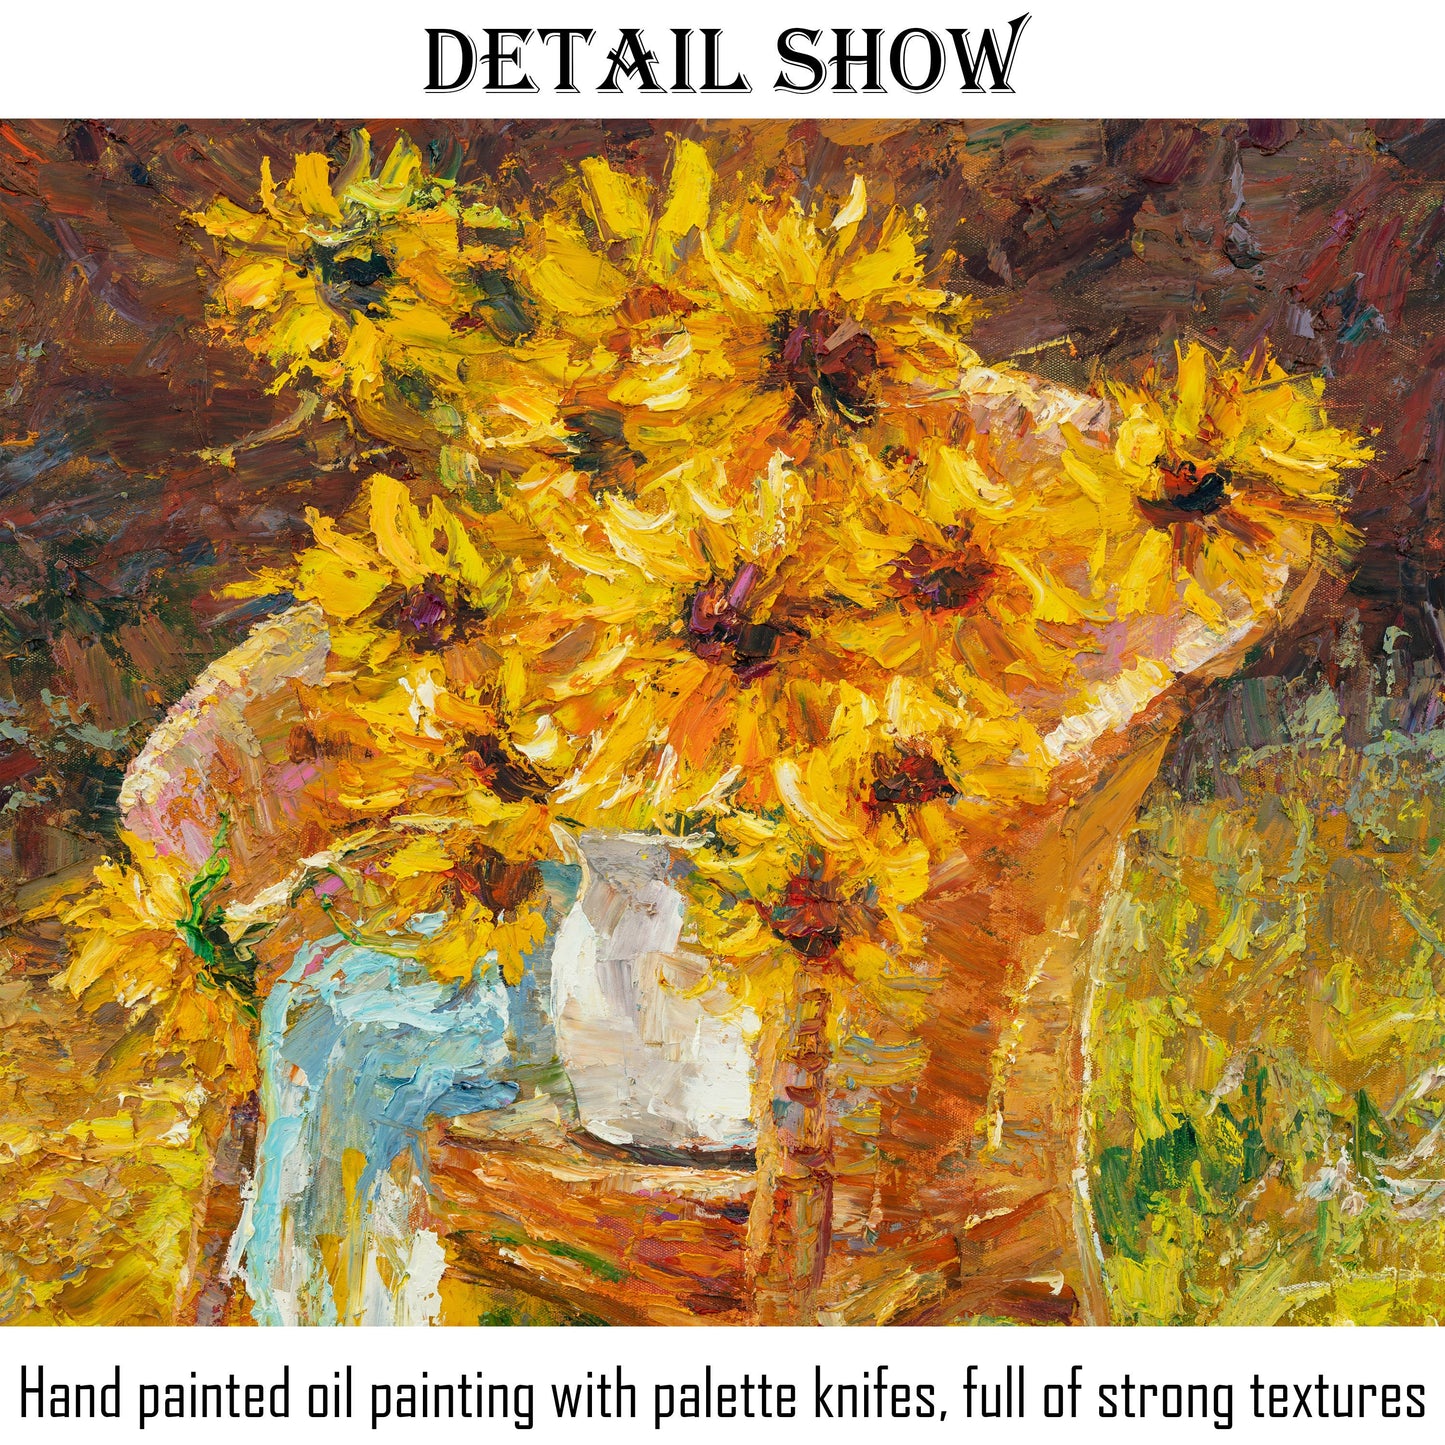 Flower Painting Sunflowers, Abstract Painting, Original Art, Palette Knife Painting, Oil Painting, Abstract Flower Painting, Rustic Wall